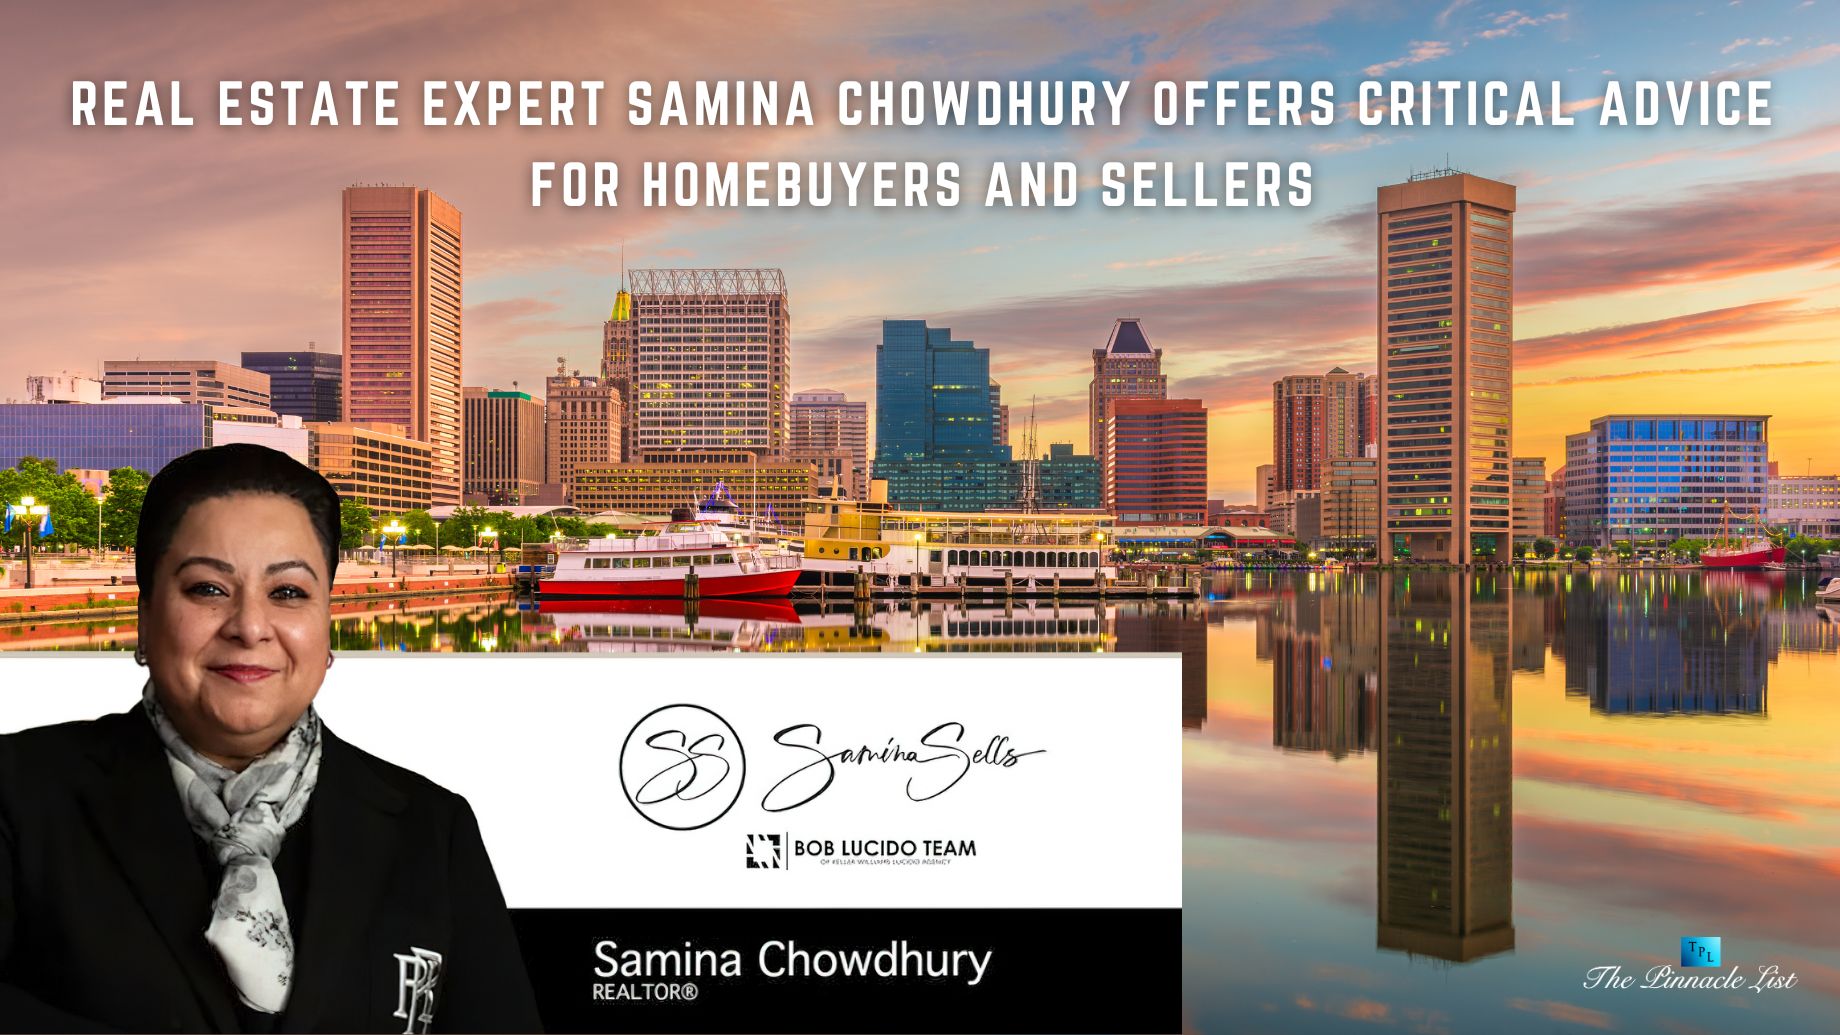 Real Estate Expert Samina Chowdhury Offers Critical Advice for Homebuyers and Sellers